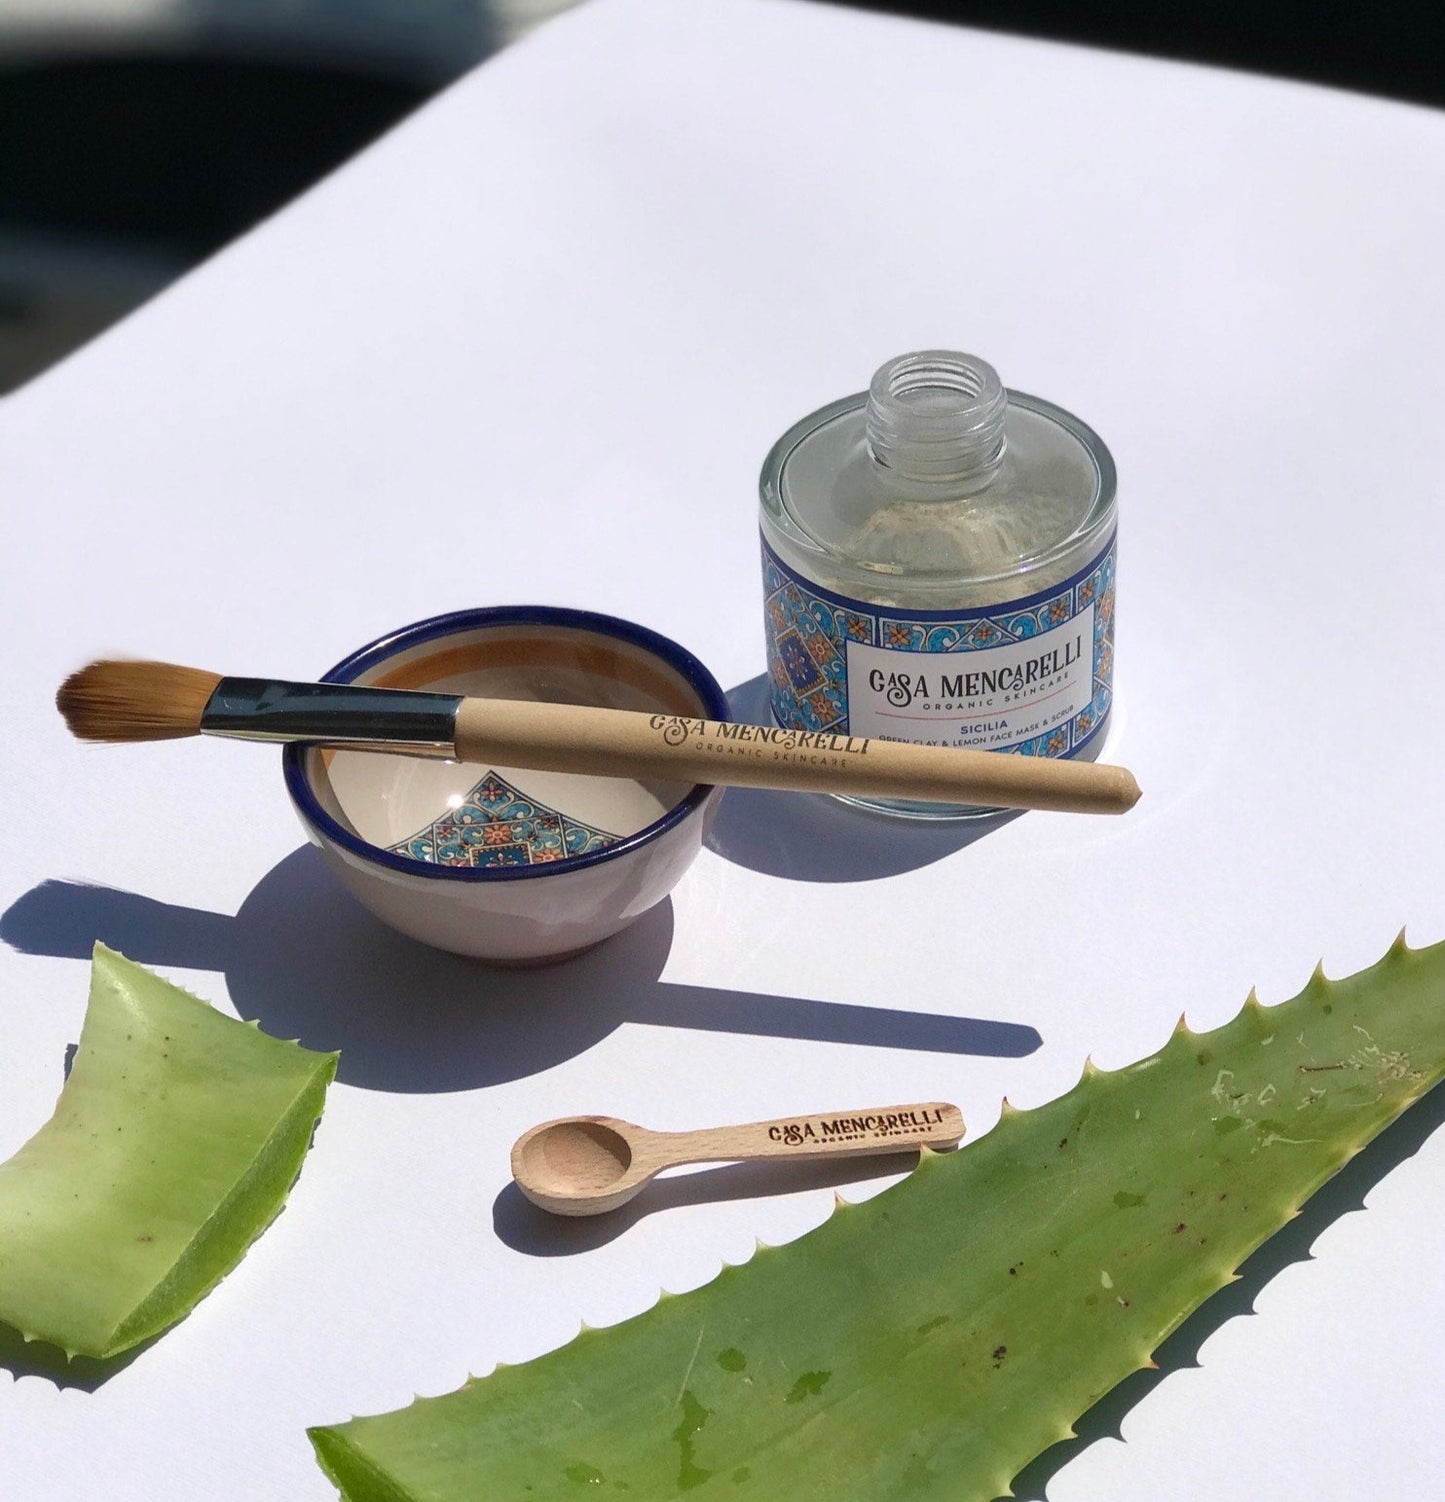 Pictured is the casa mencarelli mask mixing bowl with the mask mixing brush resting on top of the bowl. Placed diagonally behind in the green clay and lemon mask in its glass bottle. In the foreground is an Aloe Vera leaf and the casa mencarelli wooden spoon